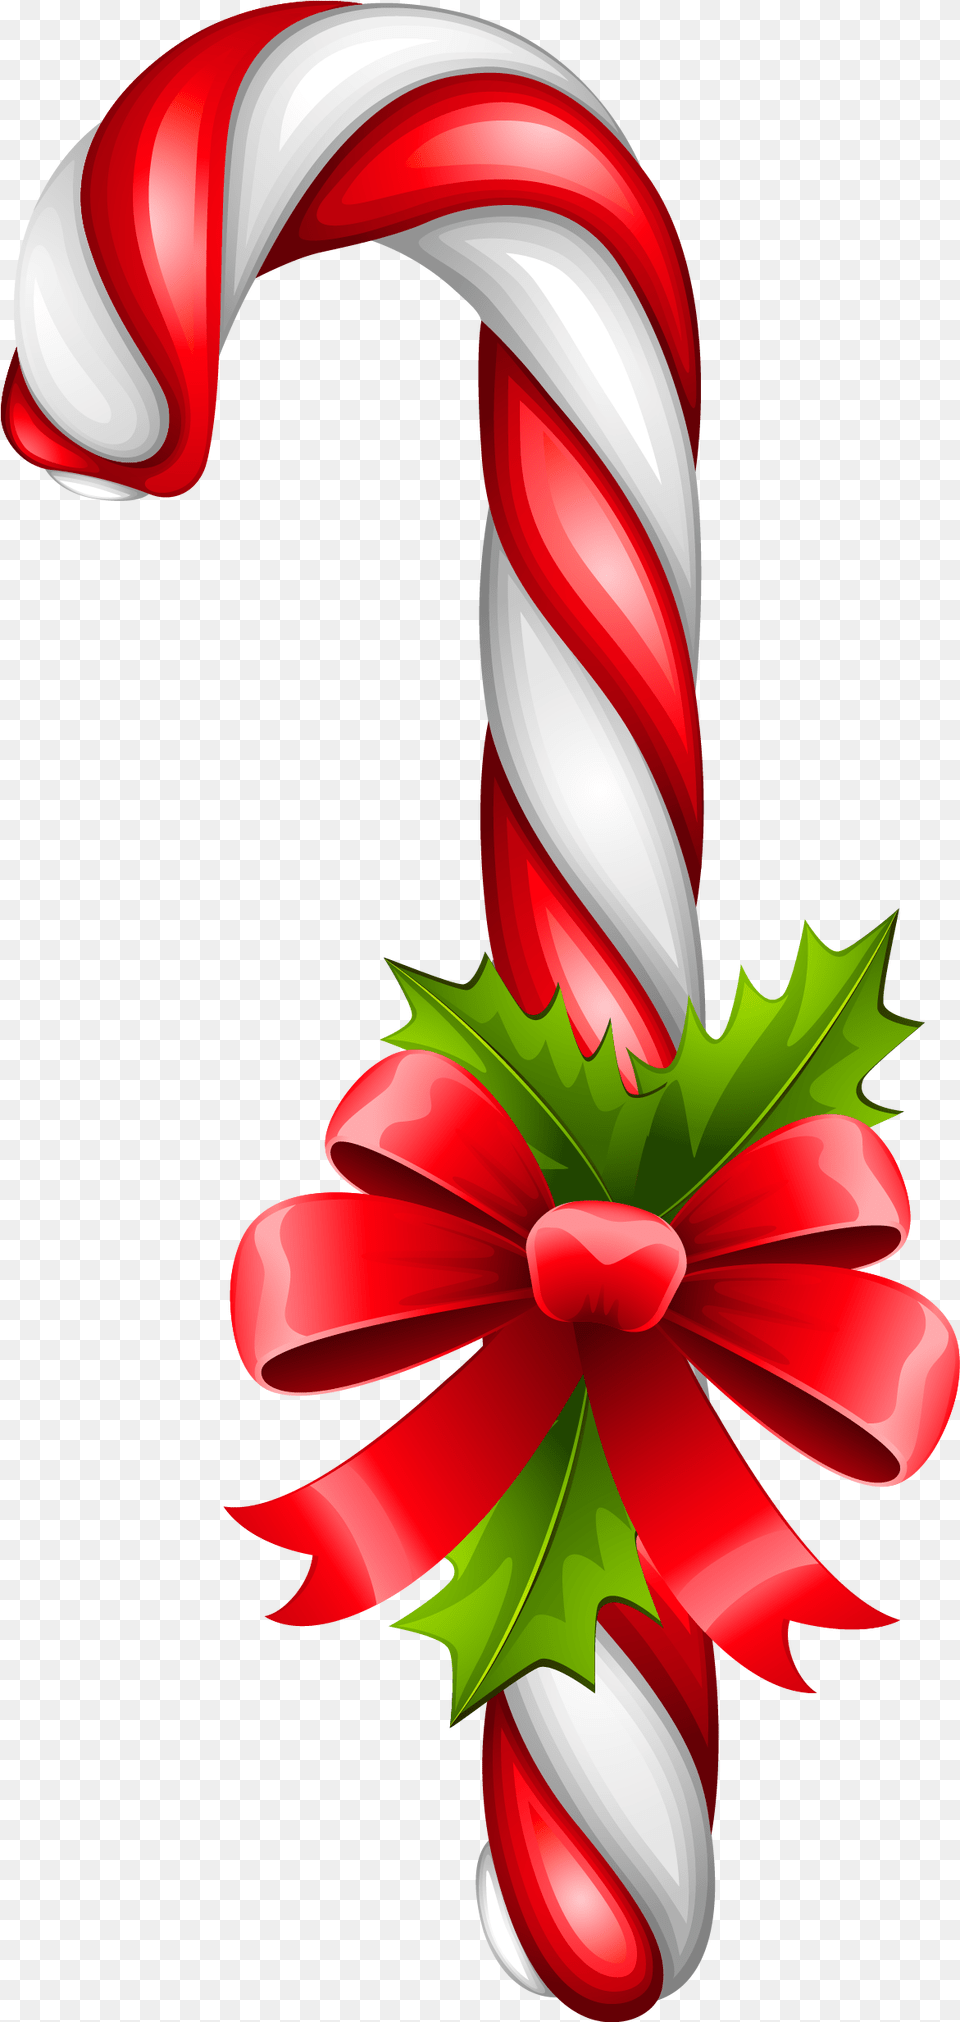 Christmas Candy Cane Clipart Christmas Candy Cane, Food, Sweets Png Image